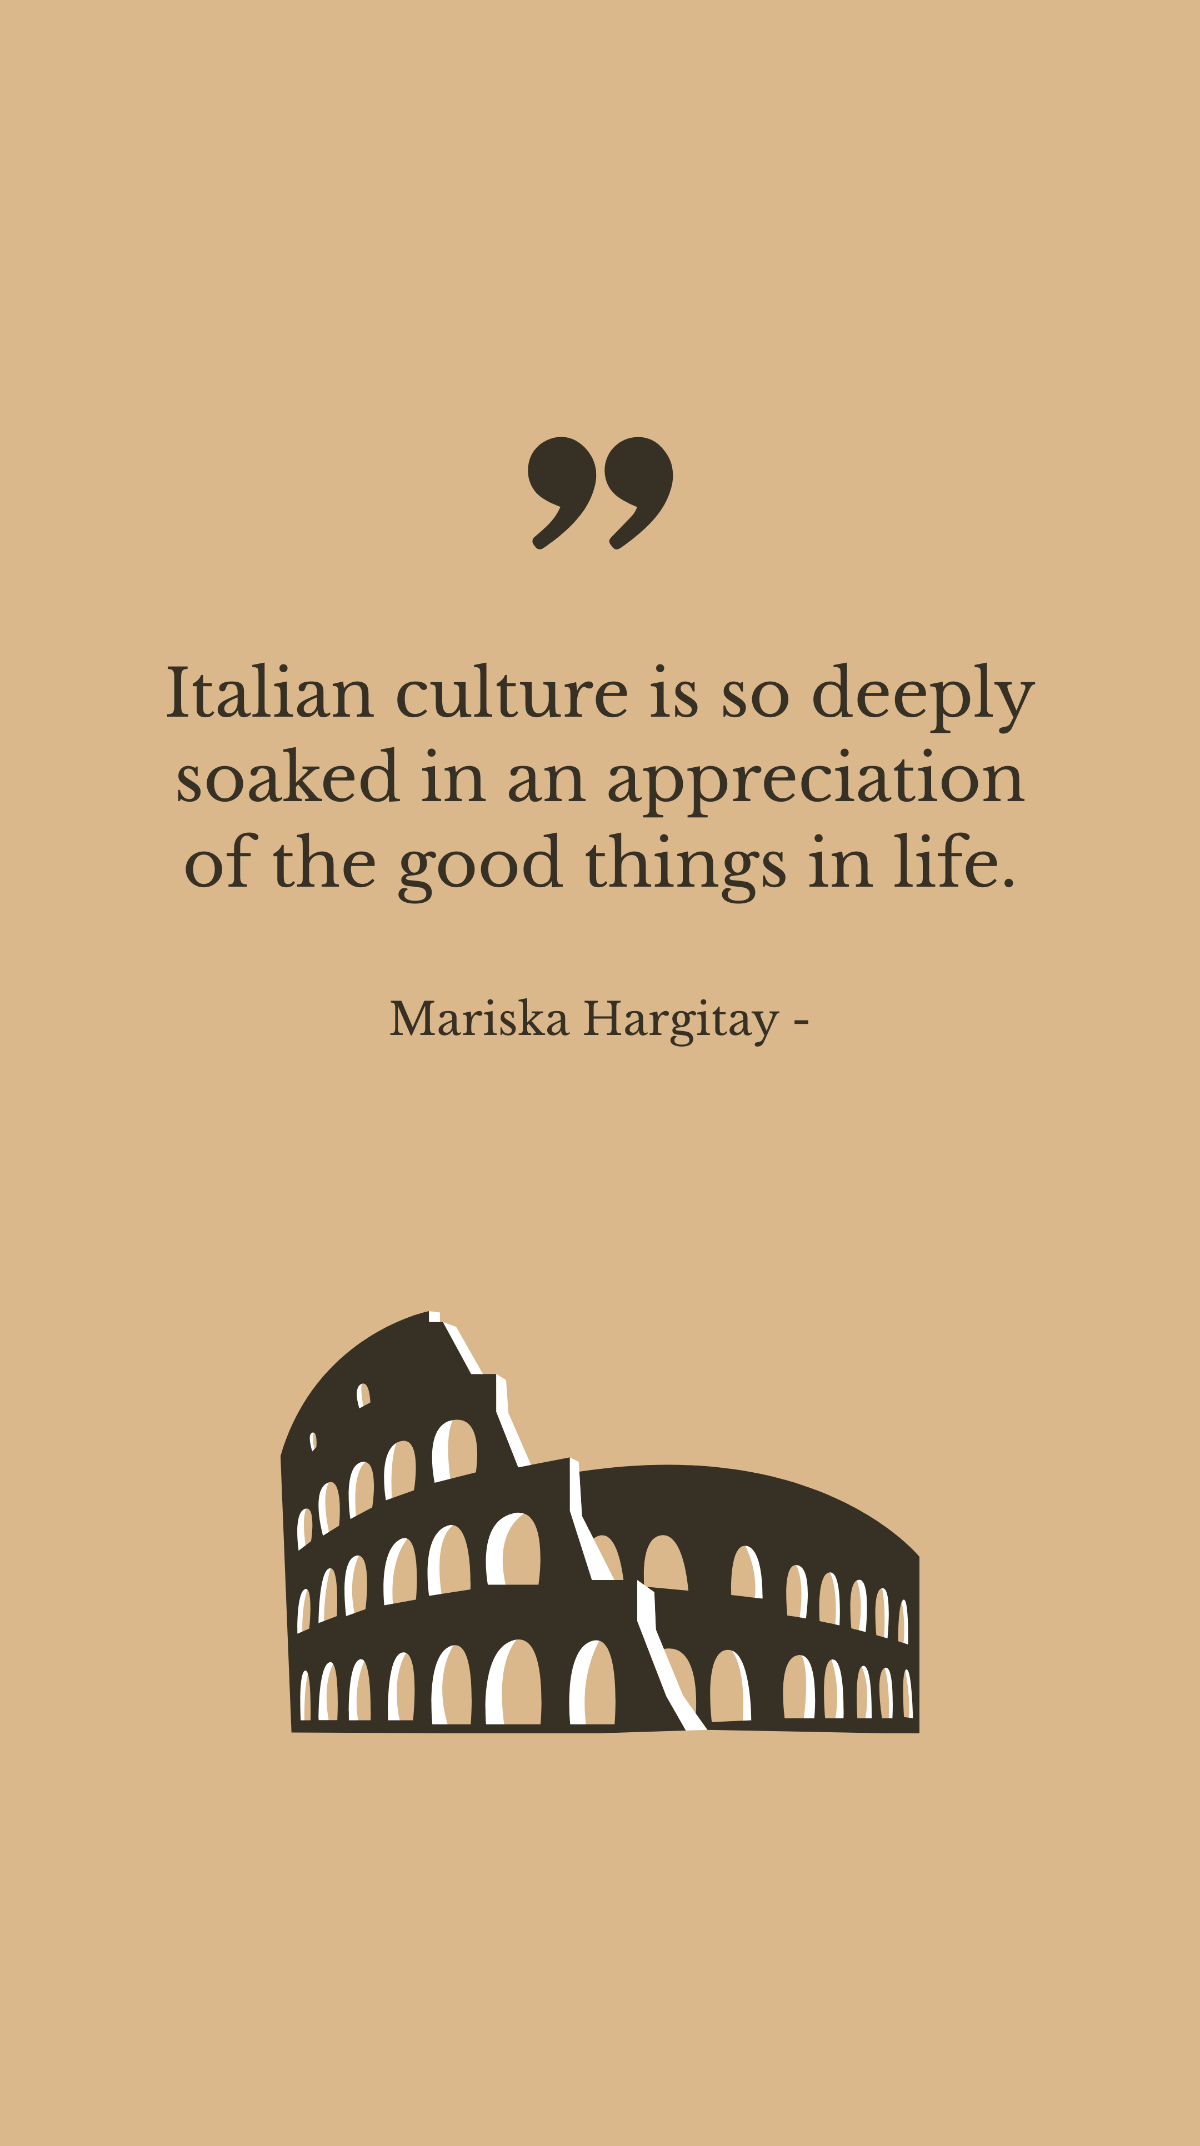 Mariska Hargitay - Italian culture is so deeply soaked in an appreciation of the good things in life. Template